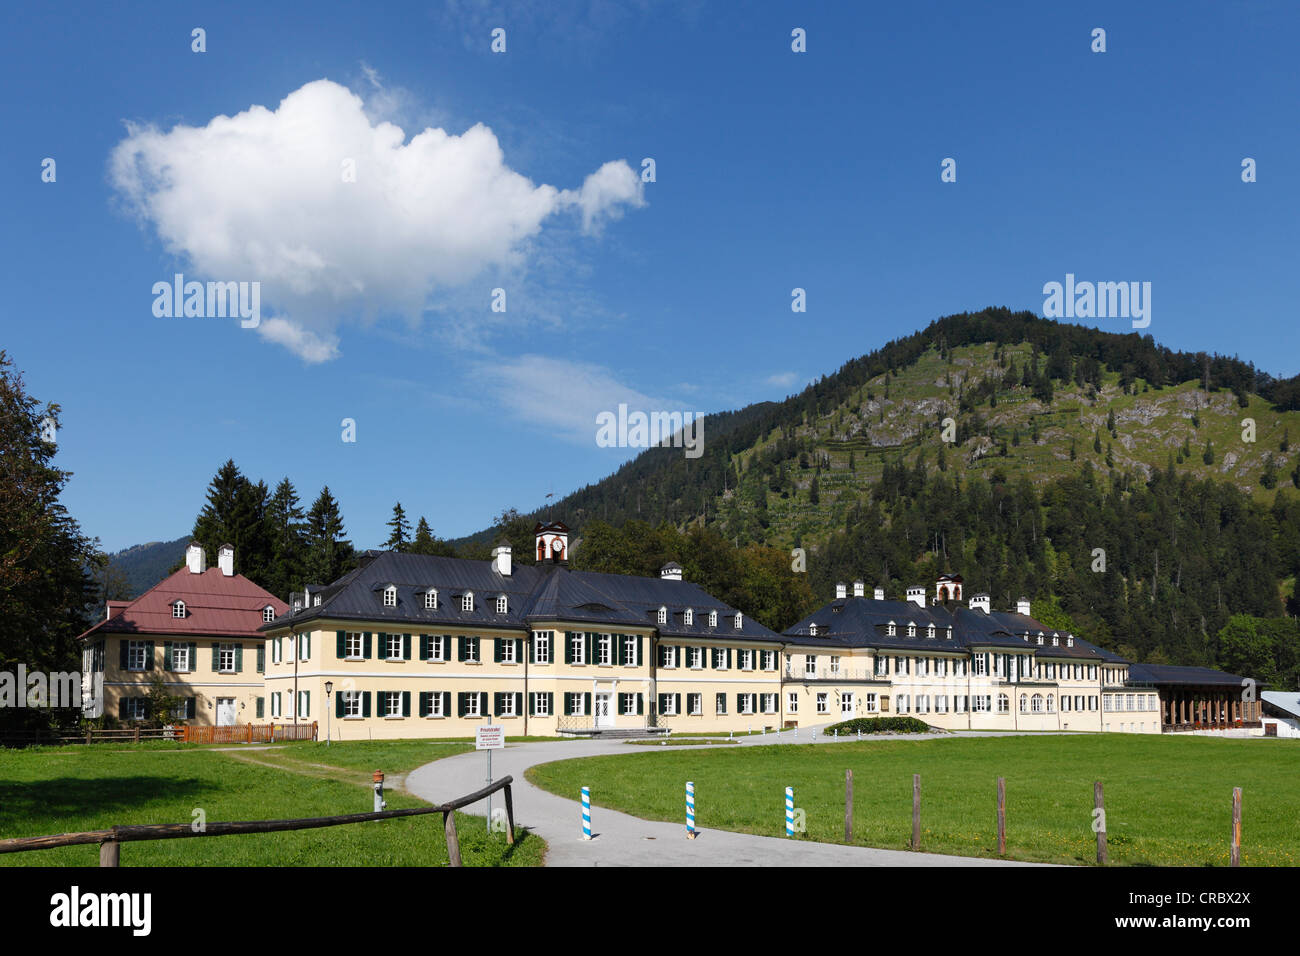 Neues Bad, educational centre of the Hanns-Seidel-Stiftung, Wildbad Kreuth, Tegernsee Valley, Upper Bavaria, Bavaria Stock Photo